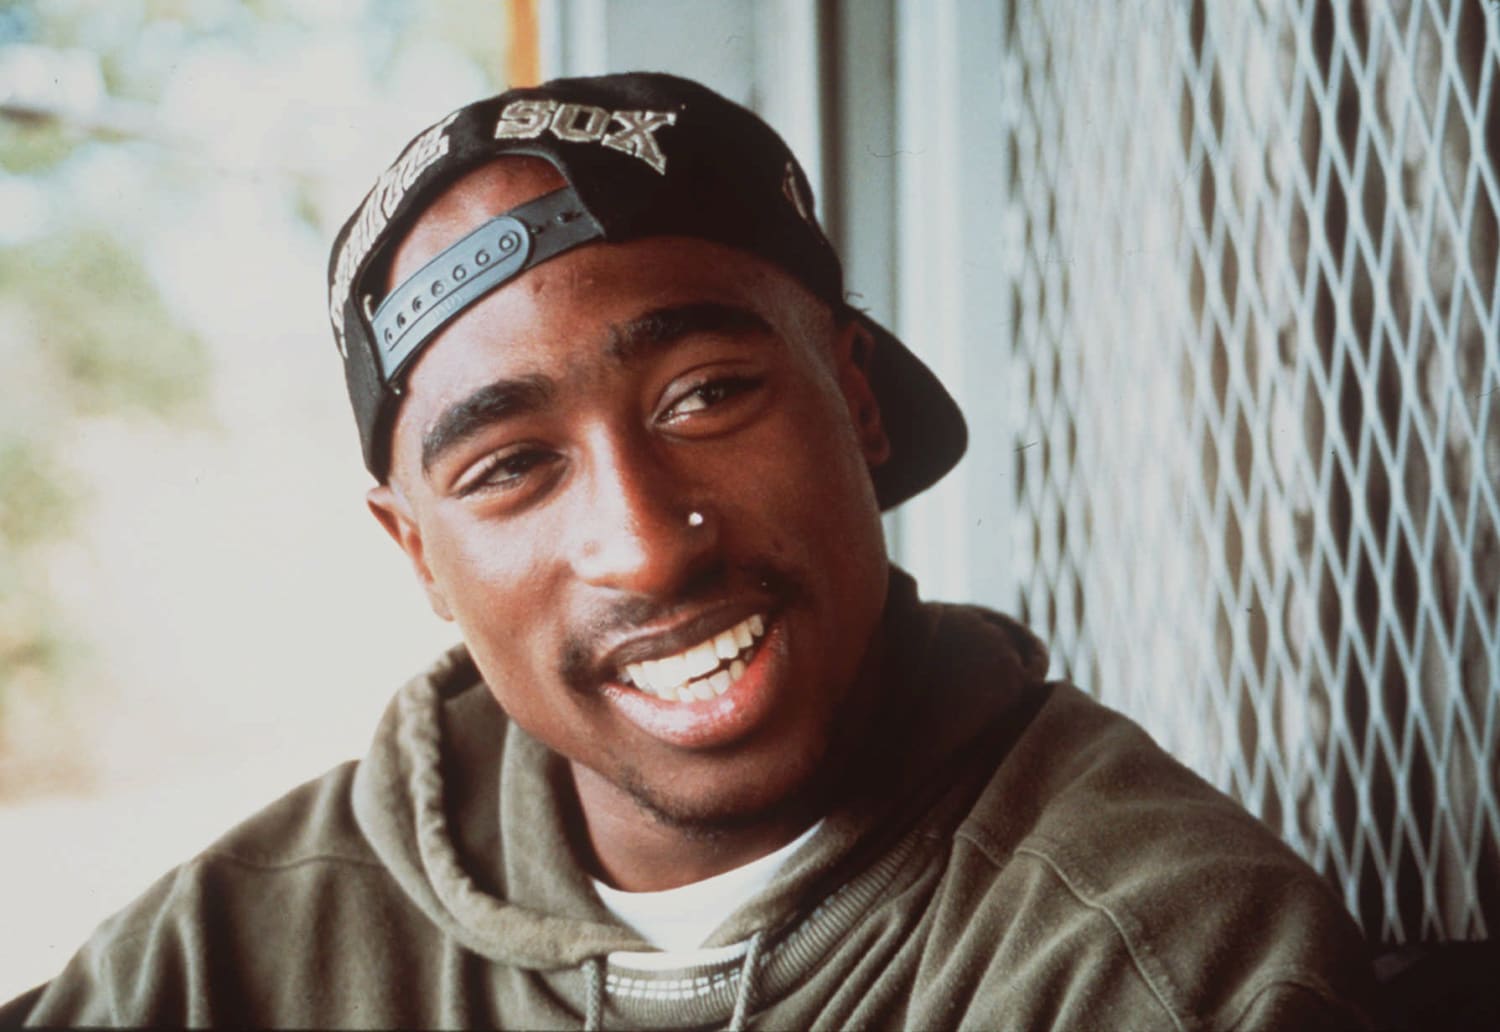 A search warrant has been issued for Tupac Shakur for Keefe D, the gang member who says he witnessed the murder